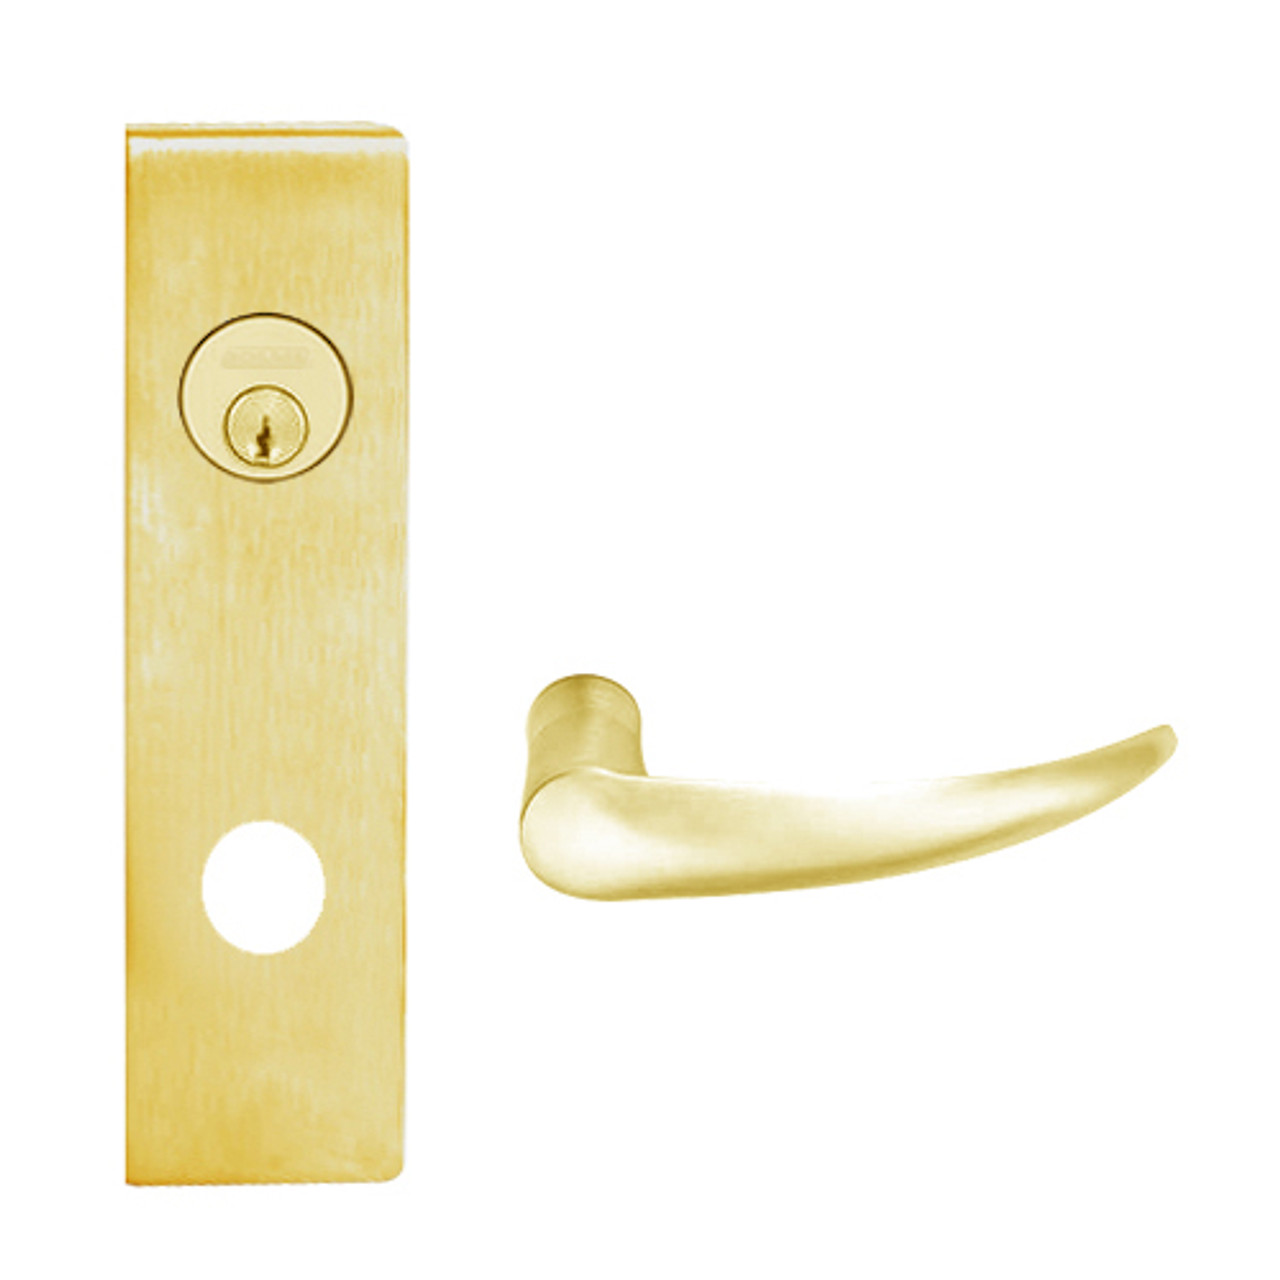 L9070P-OME-N-605 Schlage L Series Classroom Commercial Mortise Lock with Omega Lever Design in Bright Brass